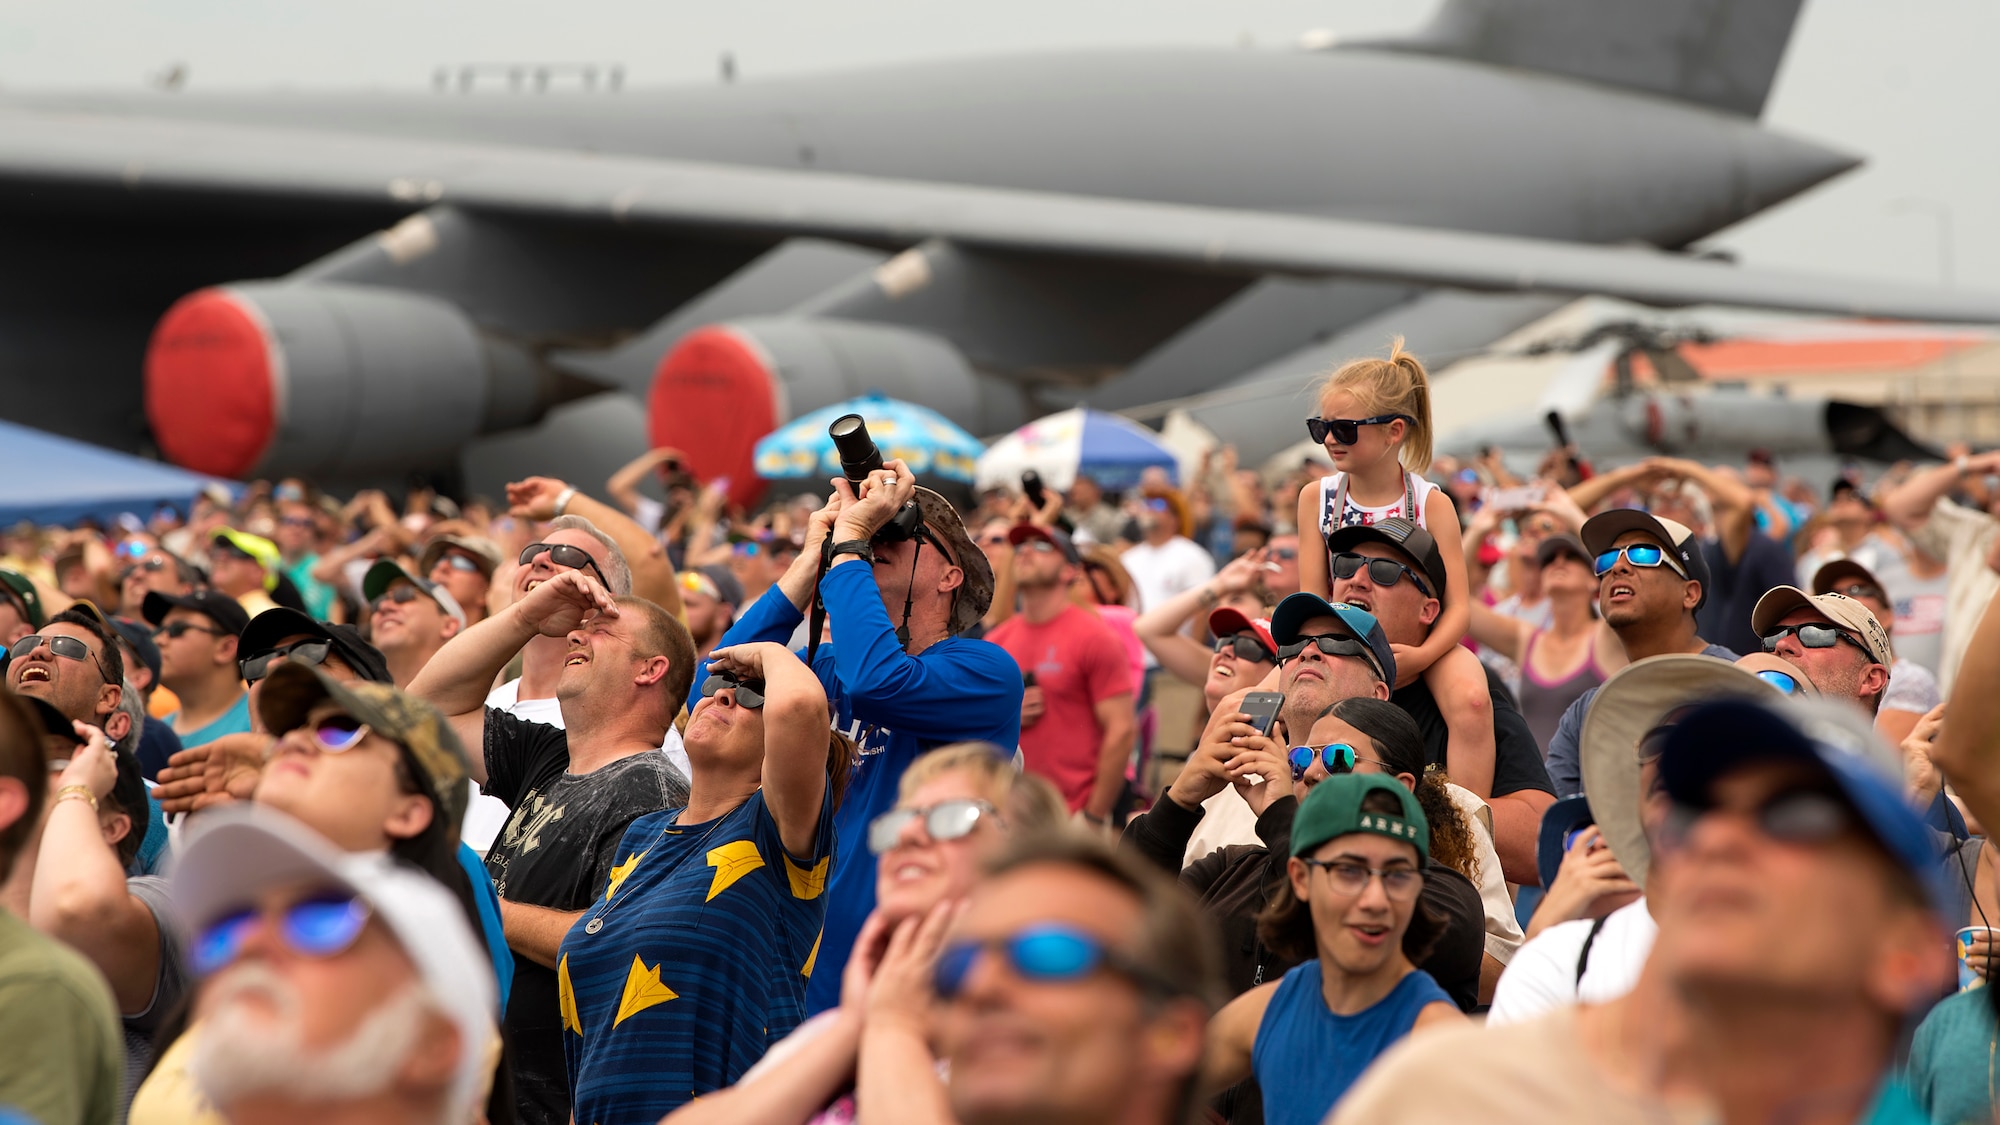 Spectators watch an aerial demonstration during Tampa Bay AirFest 2018 hosted at MacDill Air Force Base, Fla., May 12-13, 2018. MacDill opened its doors to more than 150,000 community members during Mother’s Day weekend.